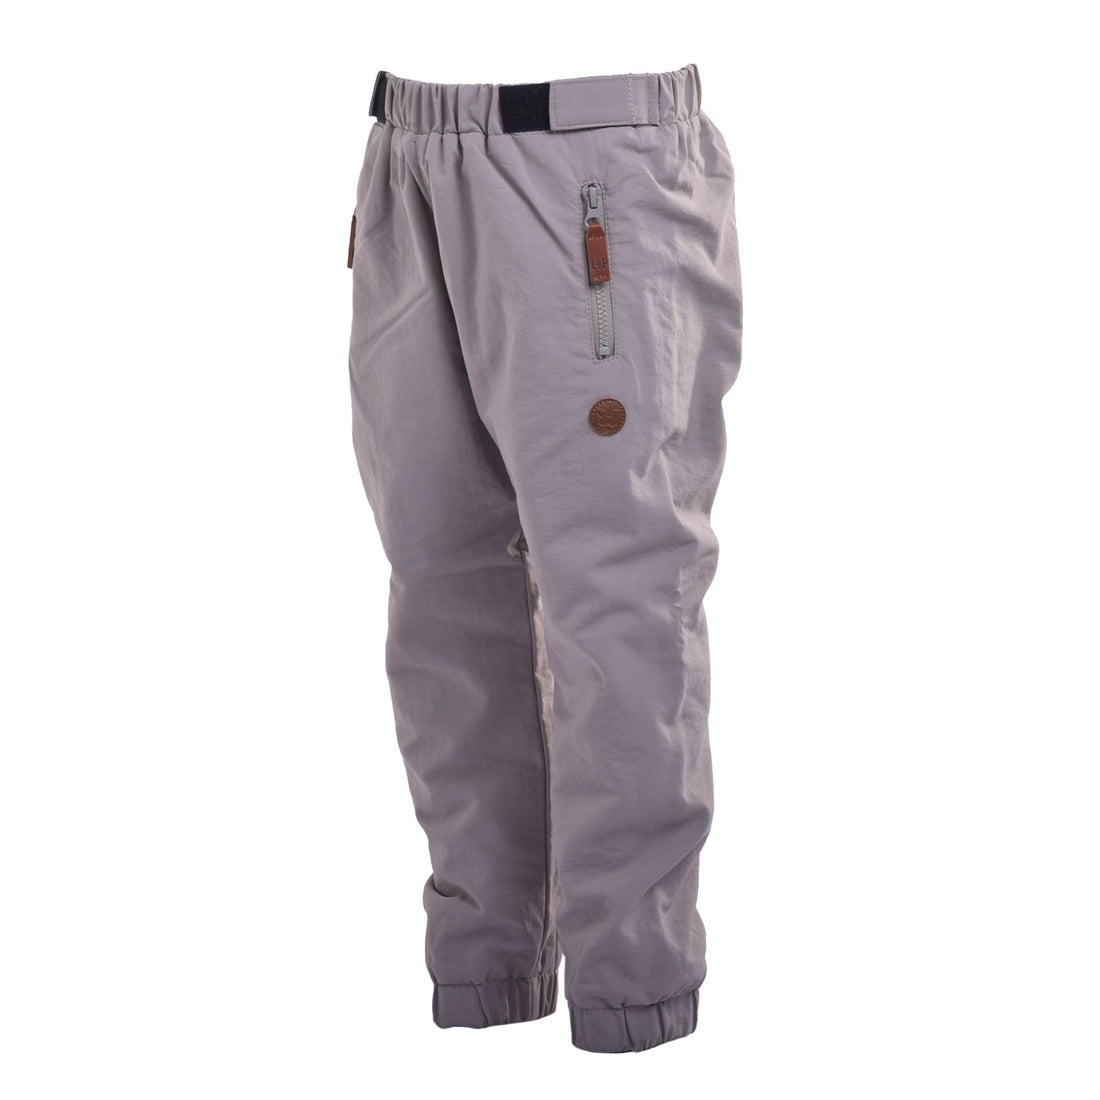 Outerwear pants, lined in polar (Surrey)